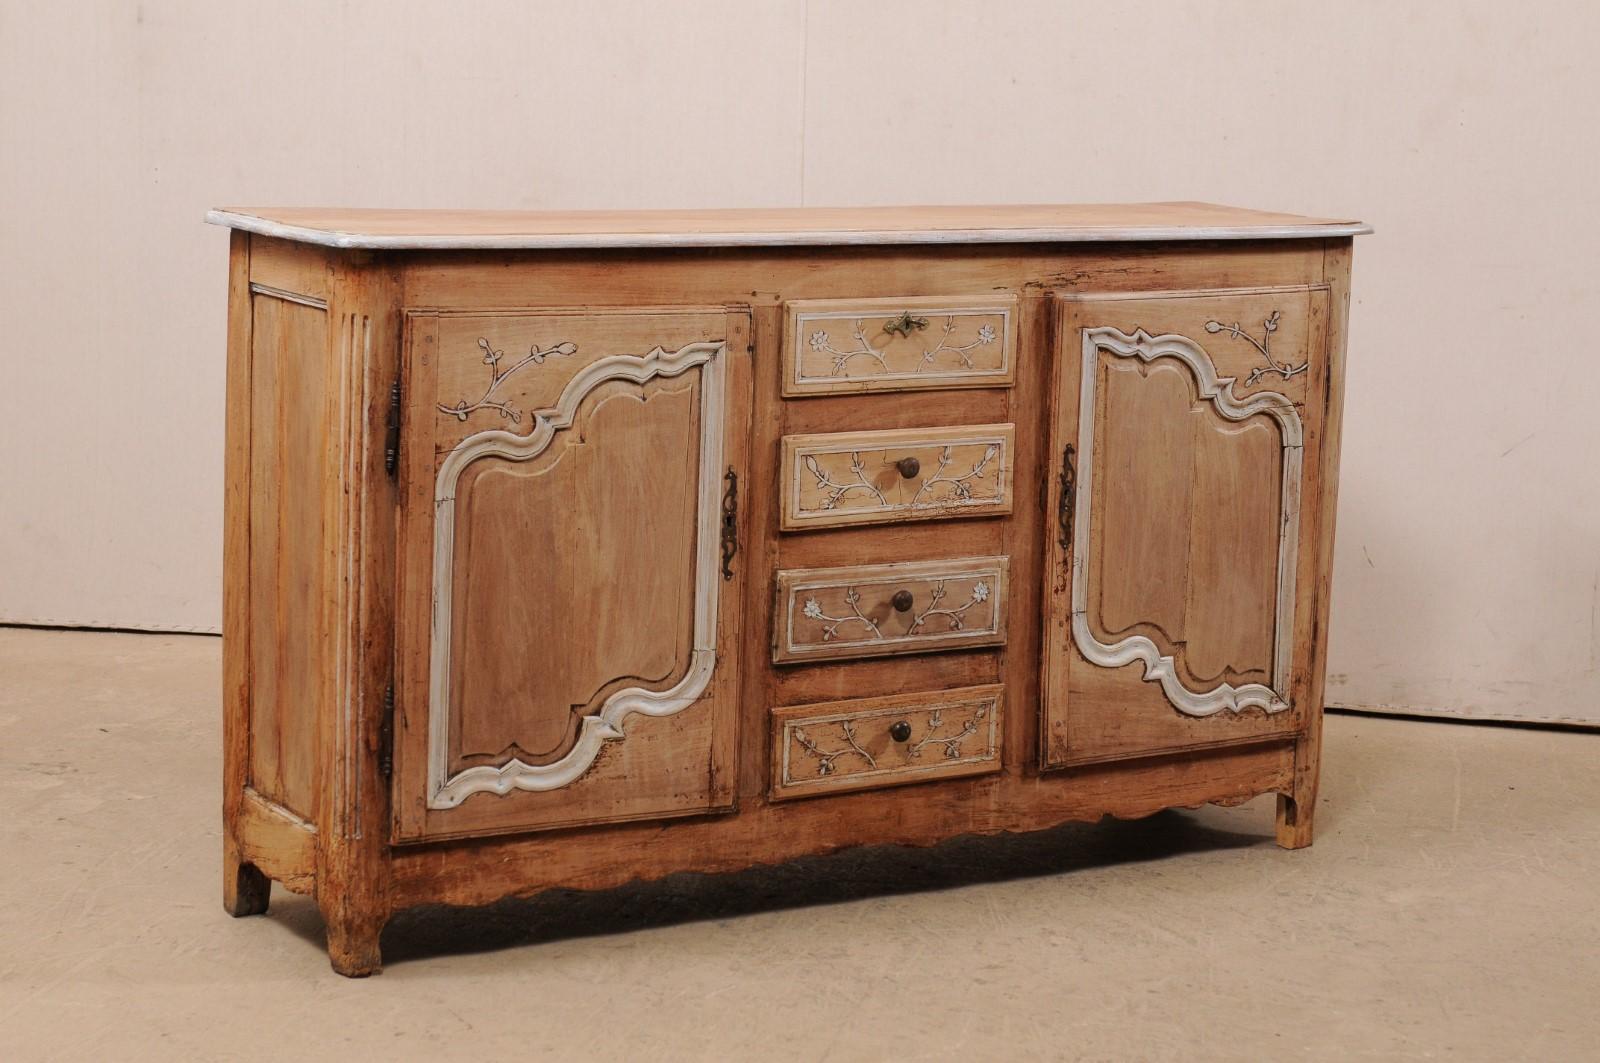 Wood Antique French Sideboard Cabinet with Delicate Floral Carvings & Scalloped Skirt